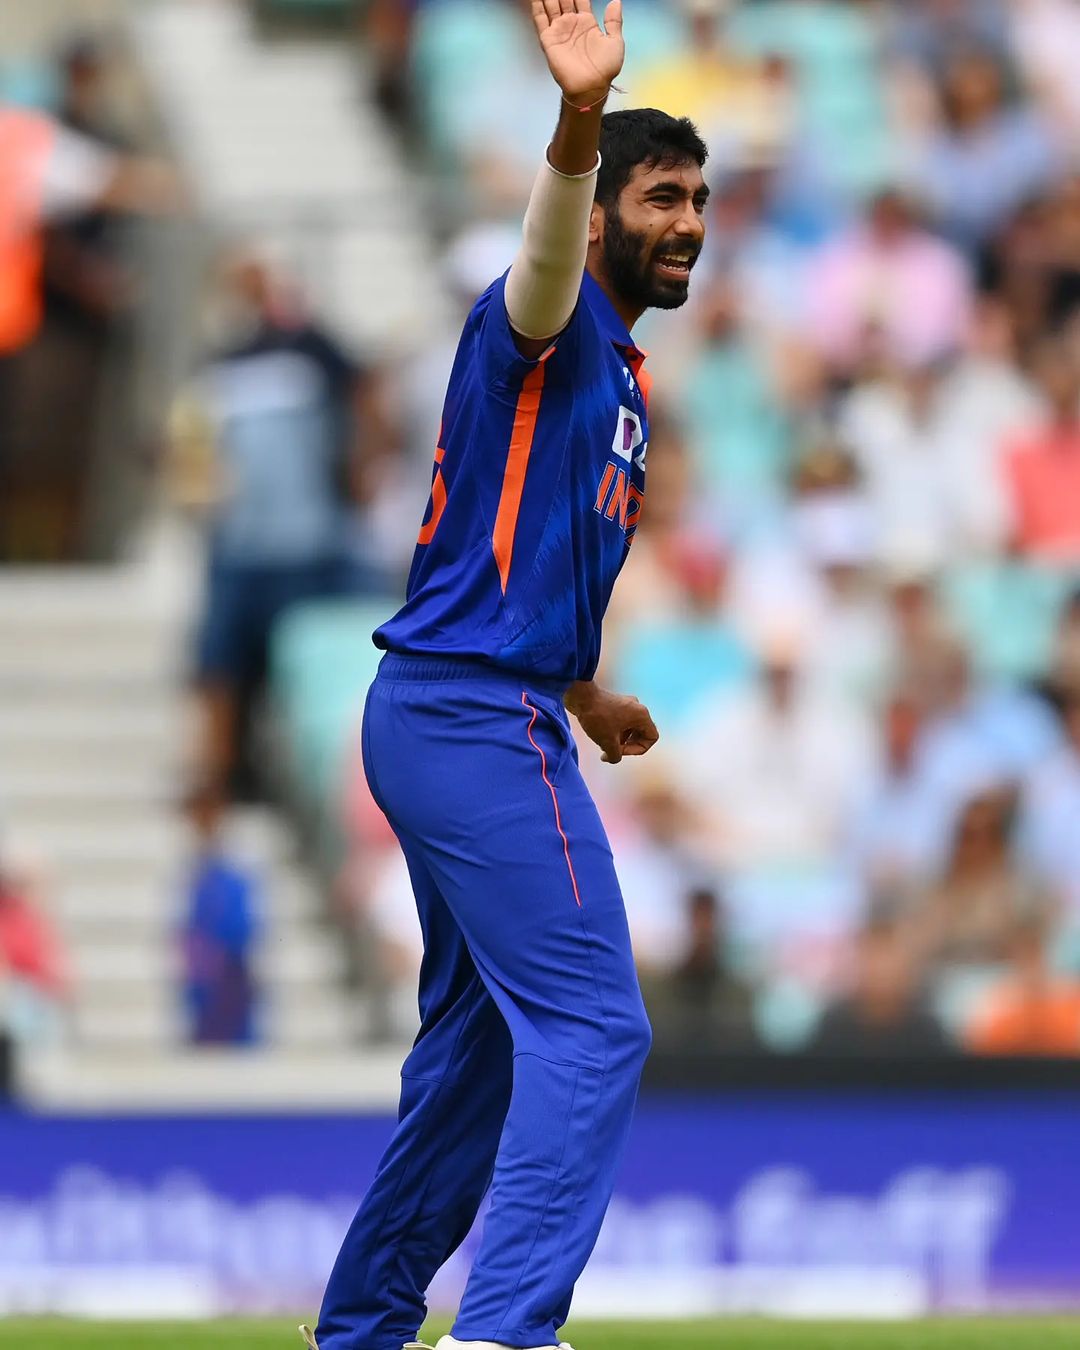 Bumrah after taking wicket